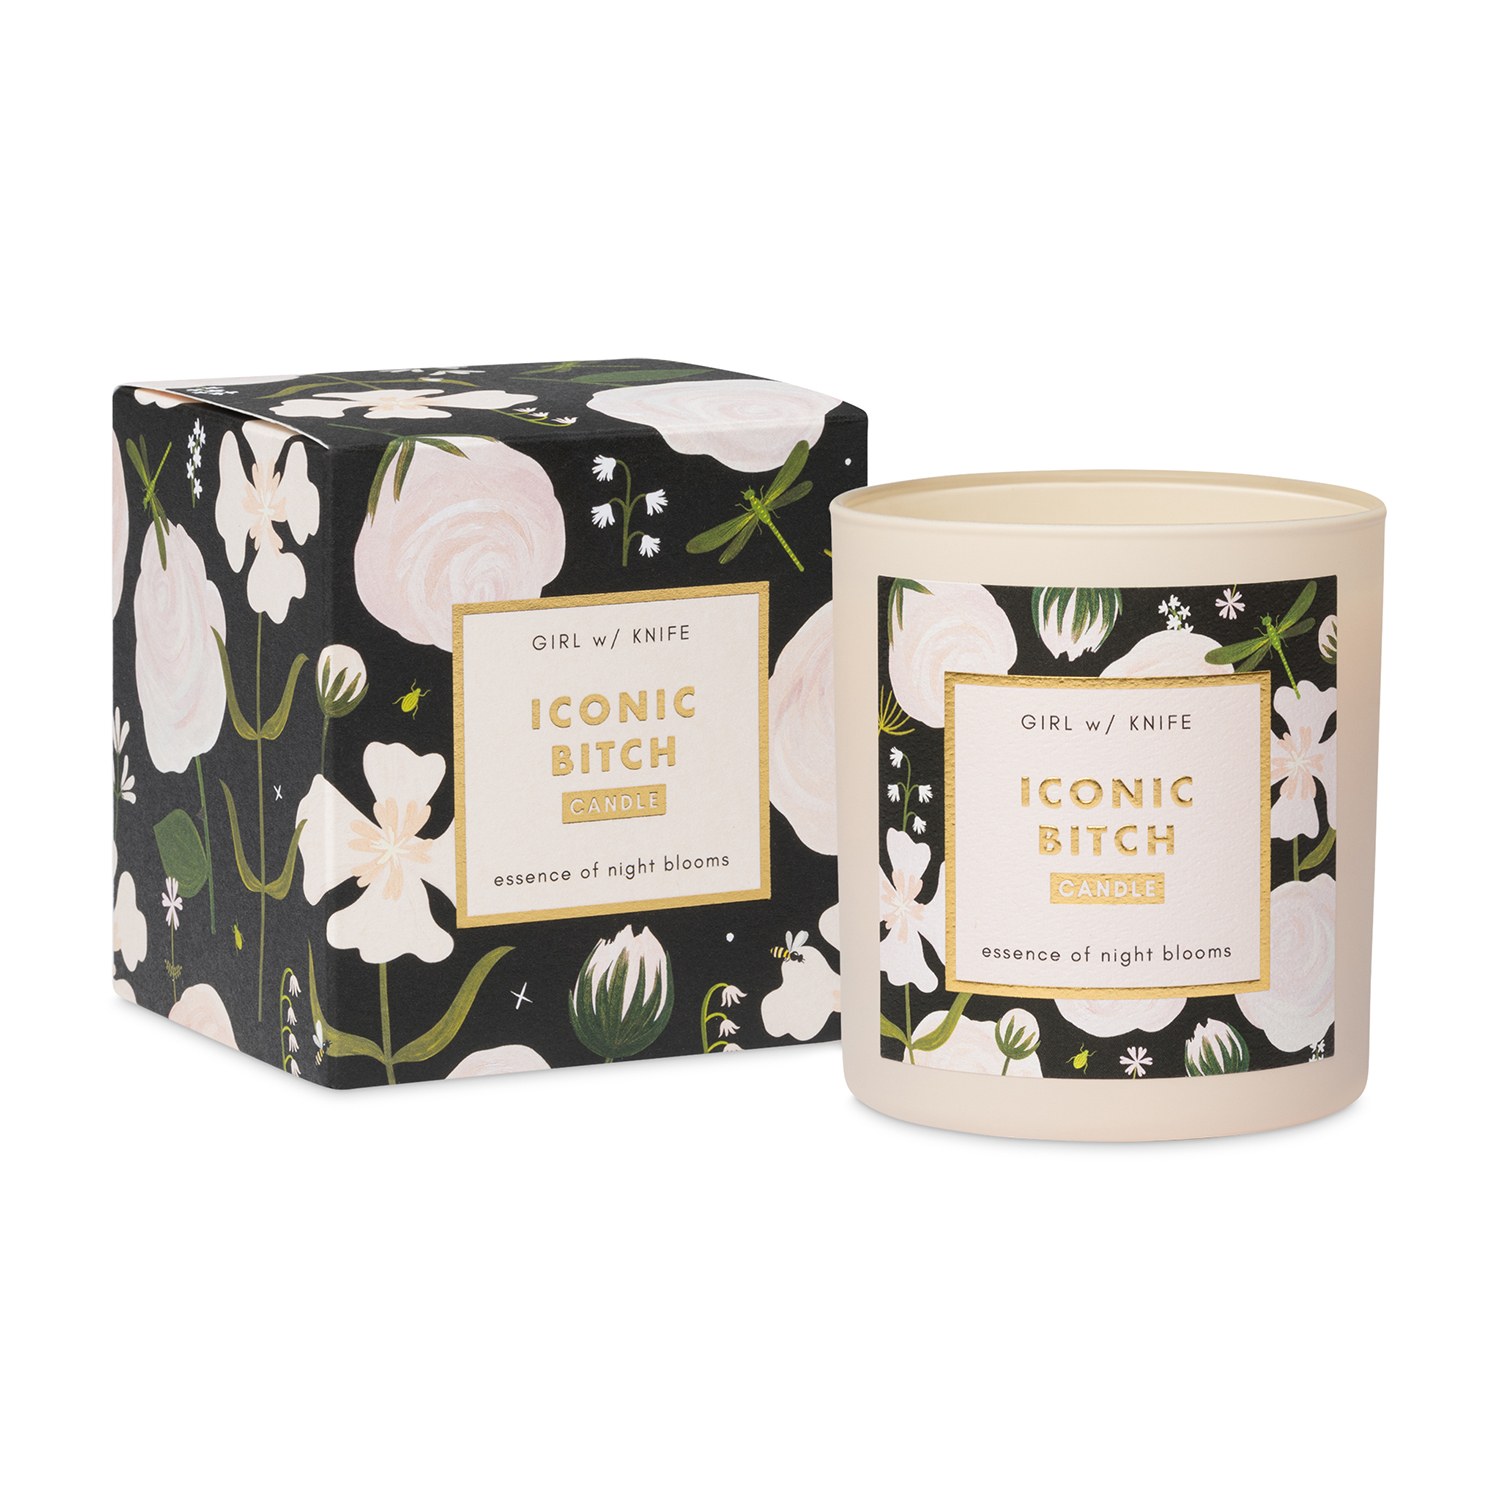 Black Iconic Bitch Candle - Essence Of Night Blooms Girl W/ Knife